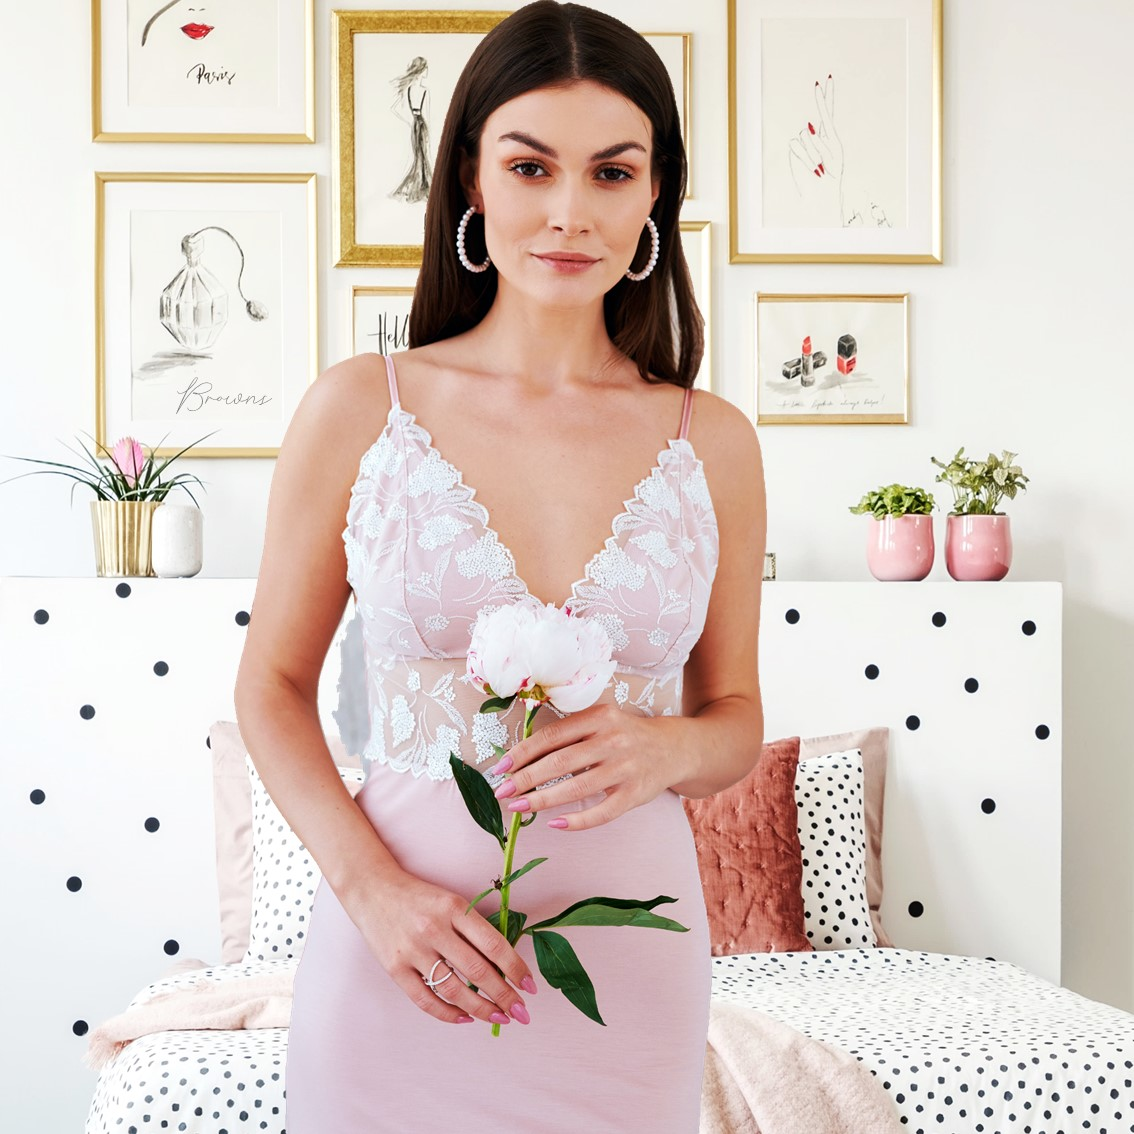 Vanilla Nightwear, Shop Women's Nightwear from Vanilla Night & Day. Luxurious lace chemises, silk nightdresses and cosy dressing gowns. Long nightdresses and short nightdresses to suit your preferred style.